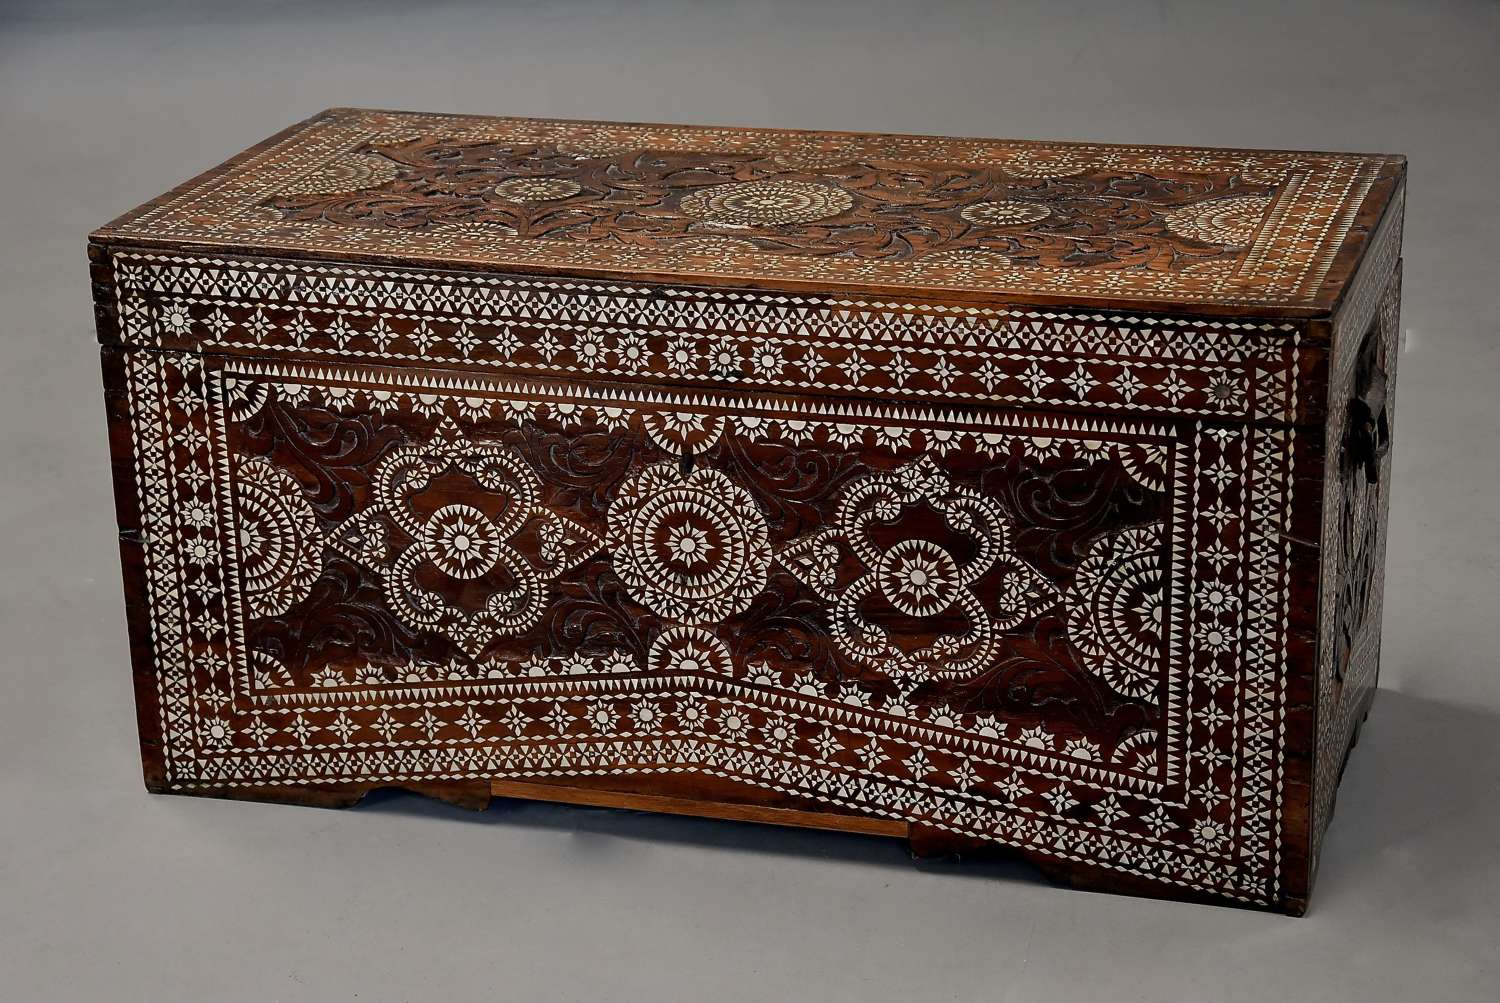 Highly decorative early 20thc hardwood & mother of pearl inlaid trunk